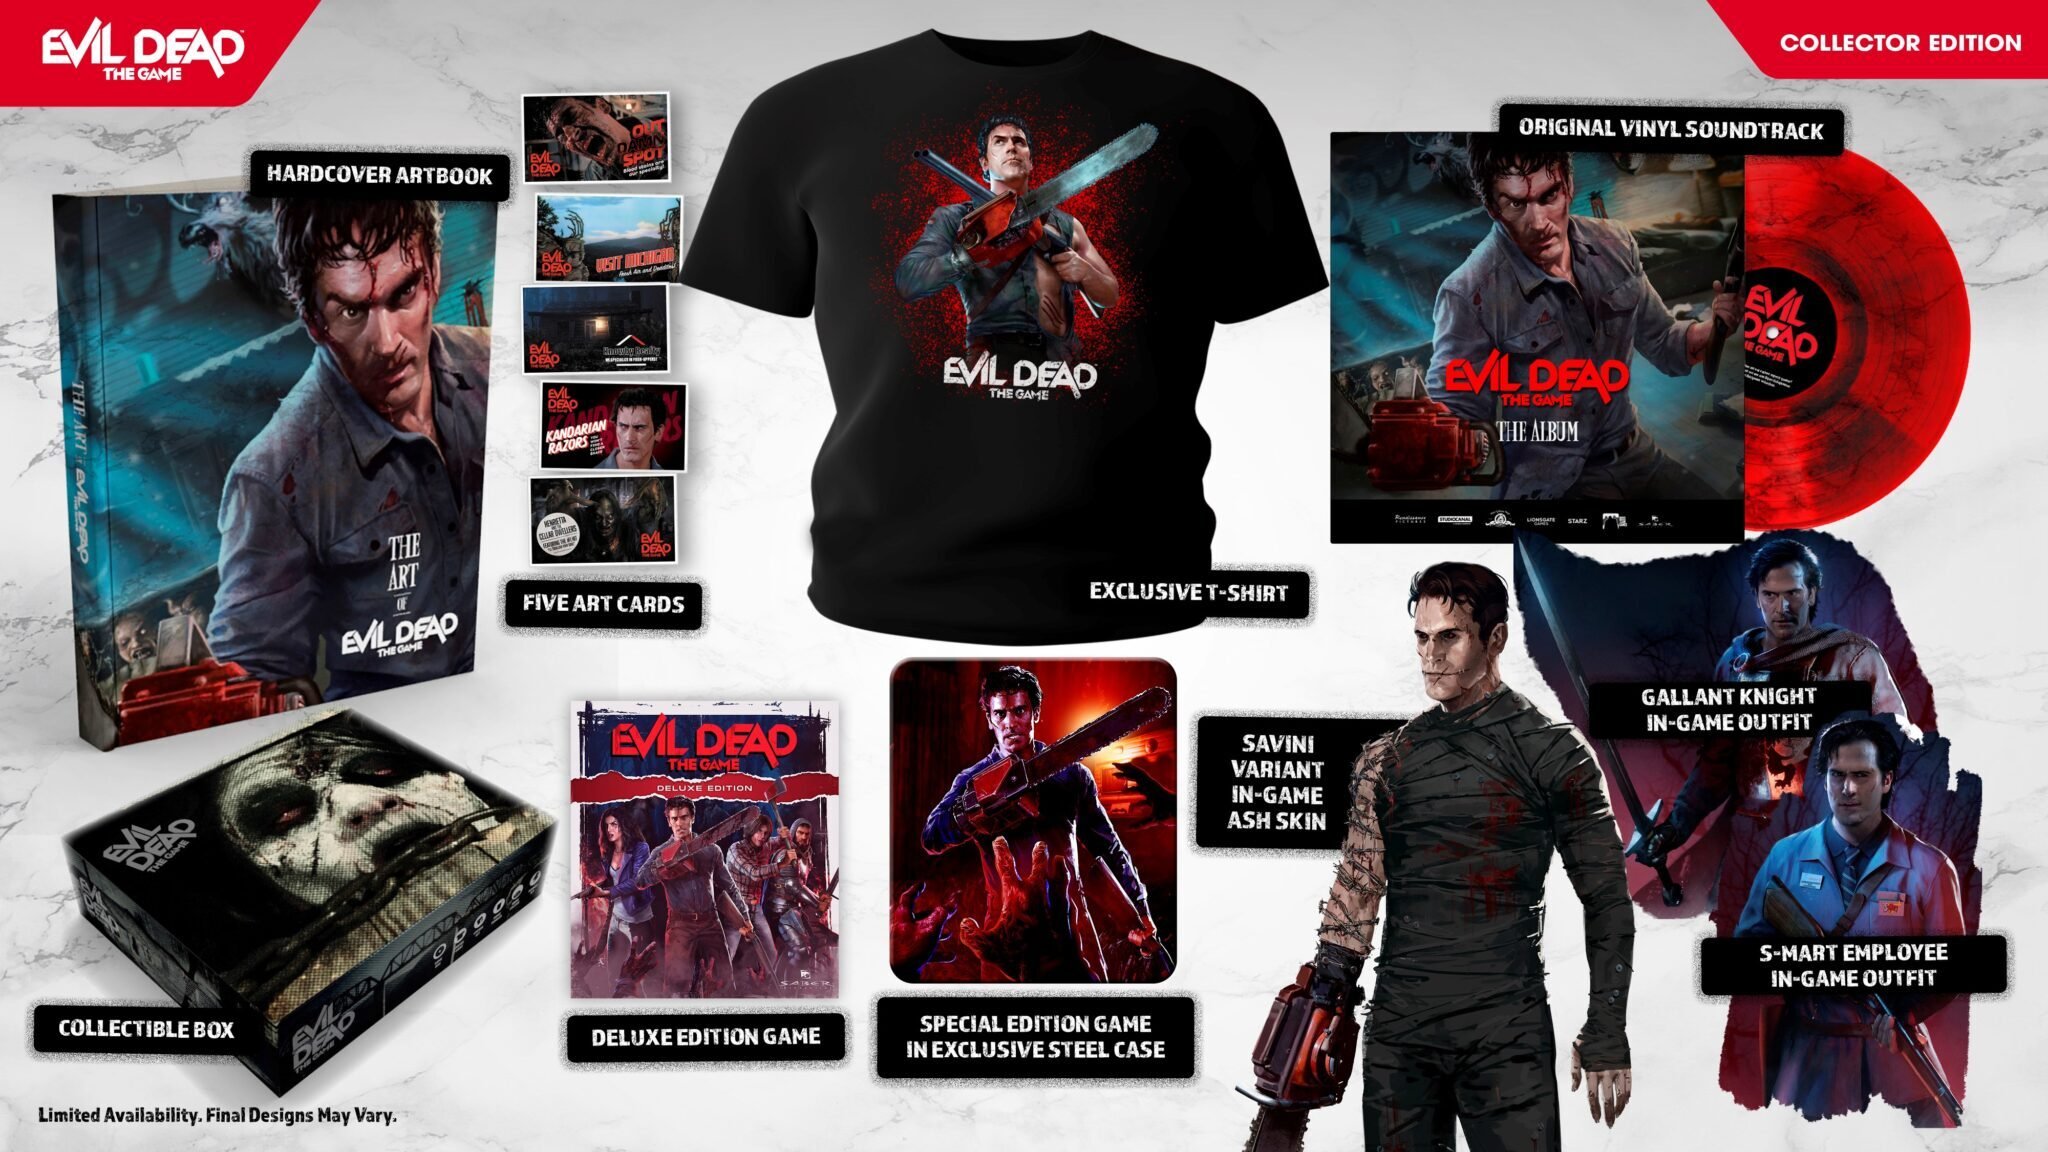 Evil Dead: The Game Collector Edition from Saber Interactive and Boss Team Games